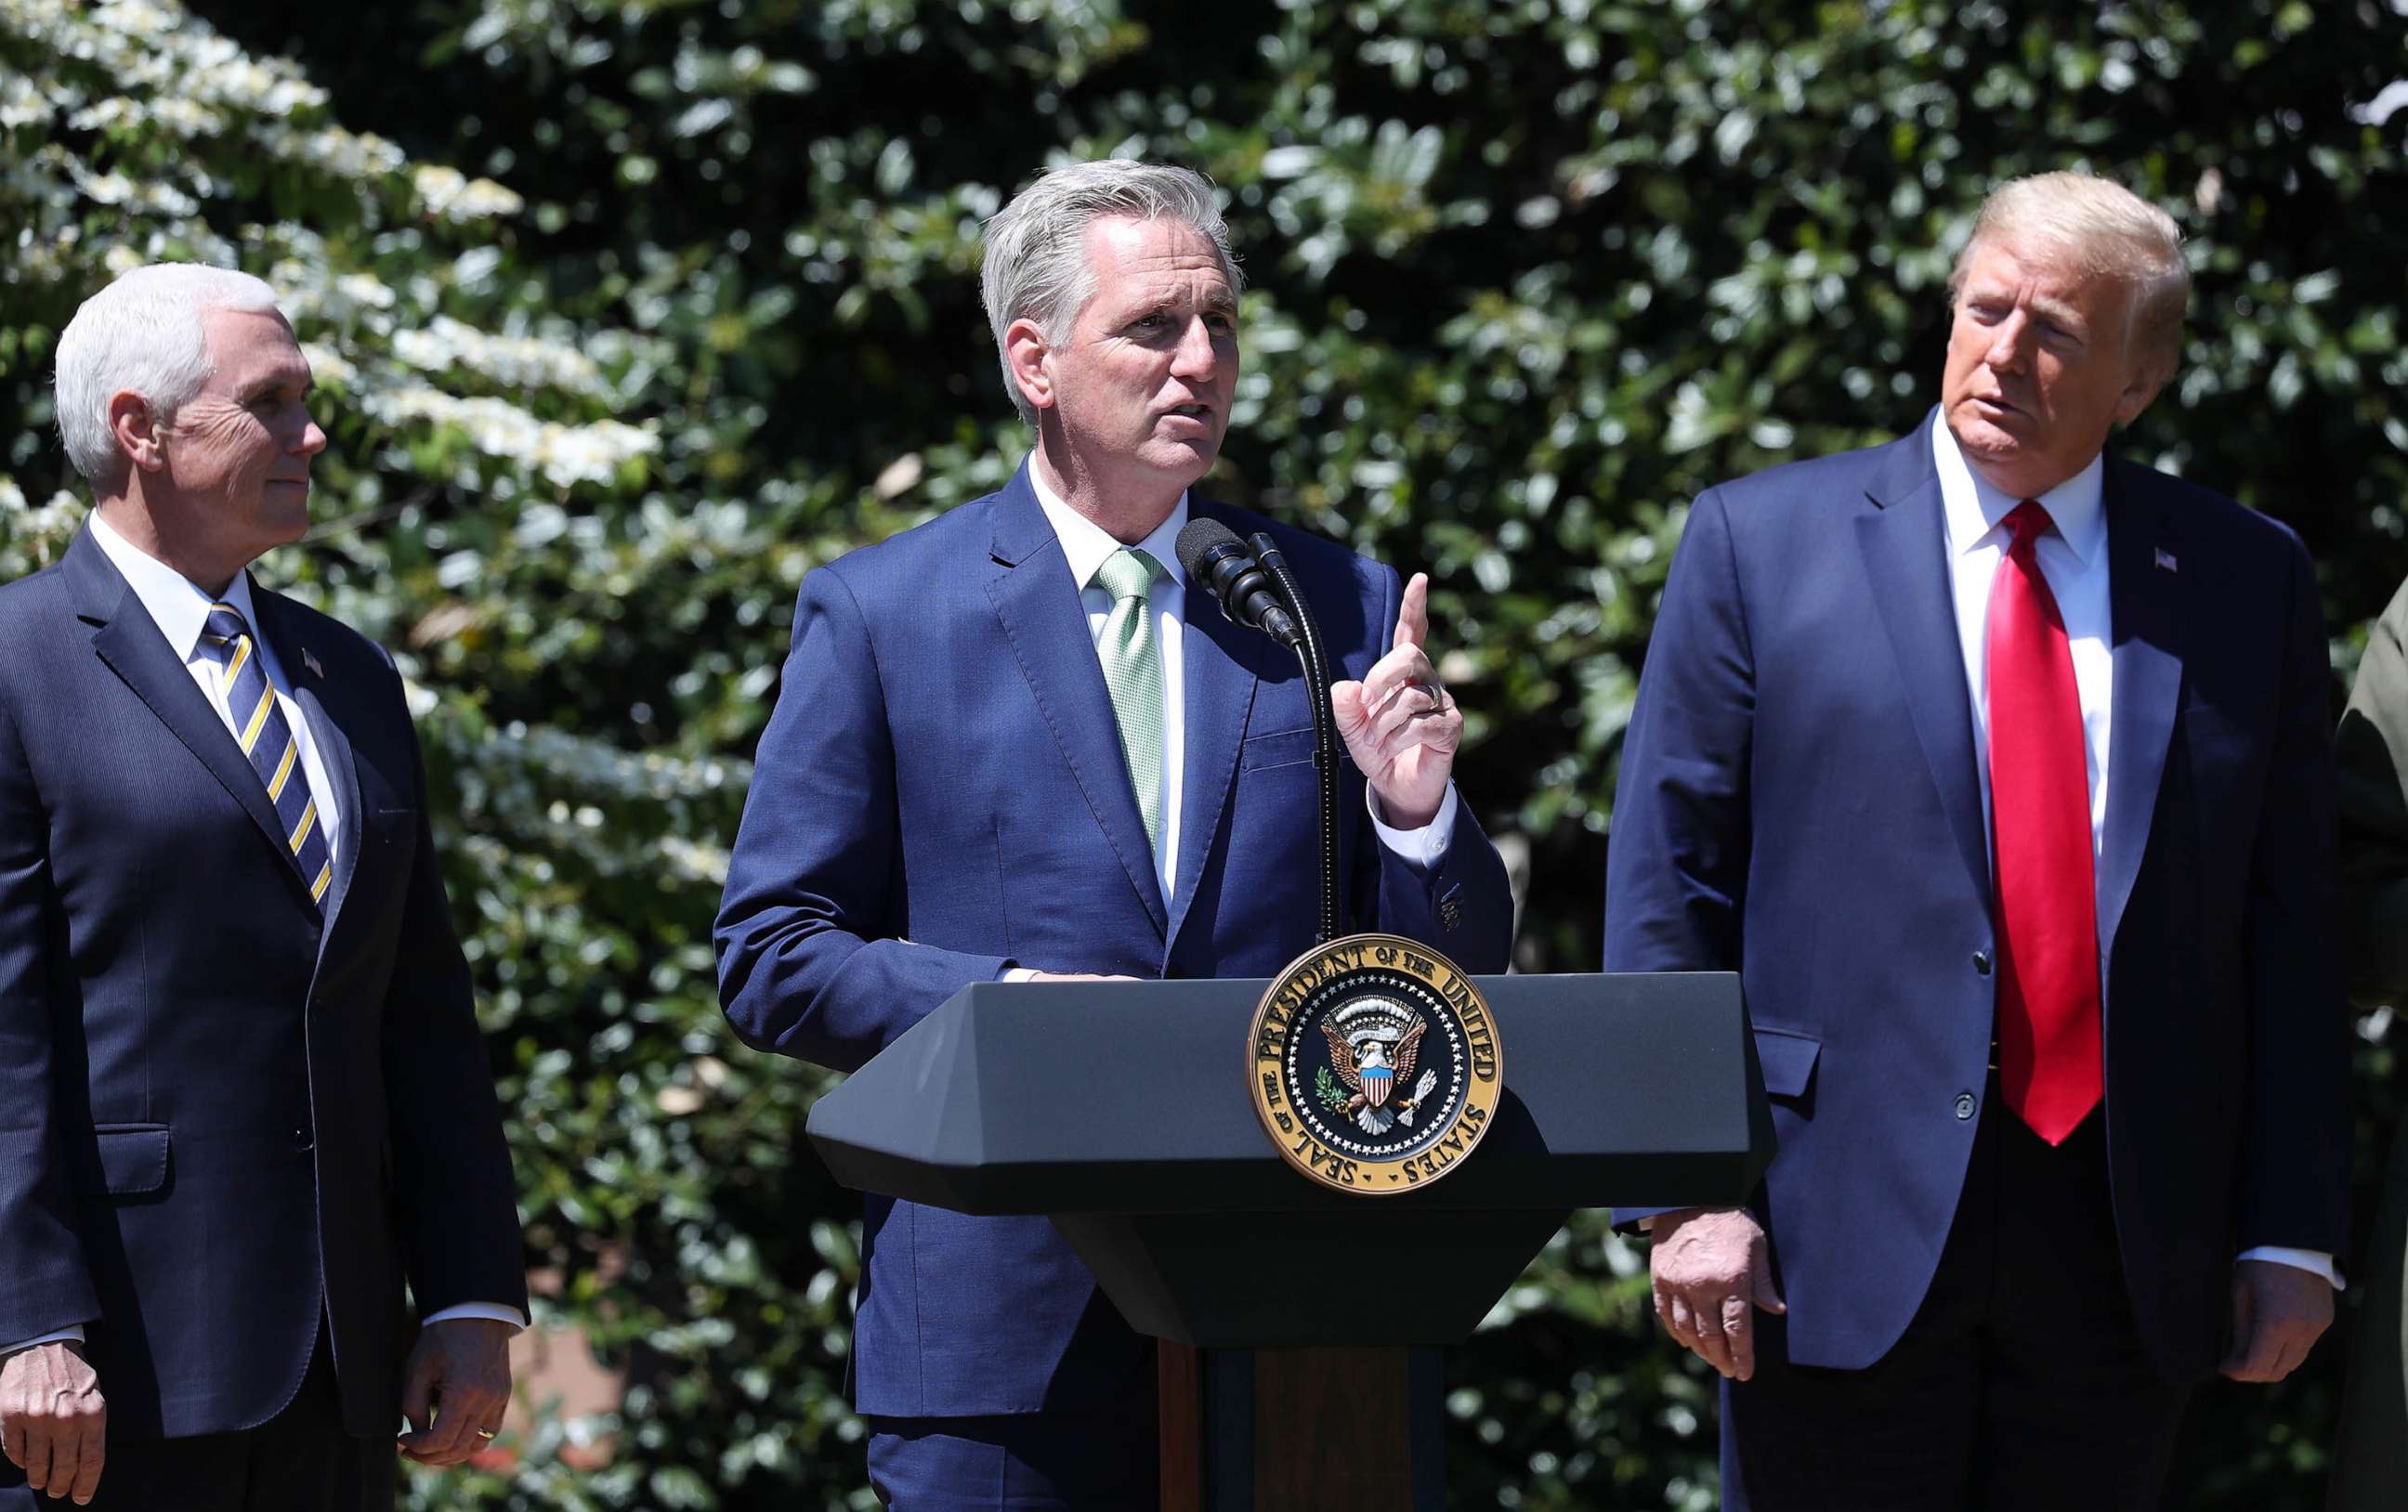 PHOTO: U.S. House Minority Leader Kevin McCarthy, speaks while U.S. President Donald Trump and U.S. Vice President Mike Pence listen during an event at the White House in Washington, D.C., Wednesday, April 22, 2020.